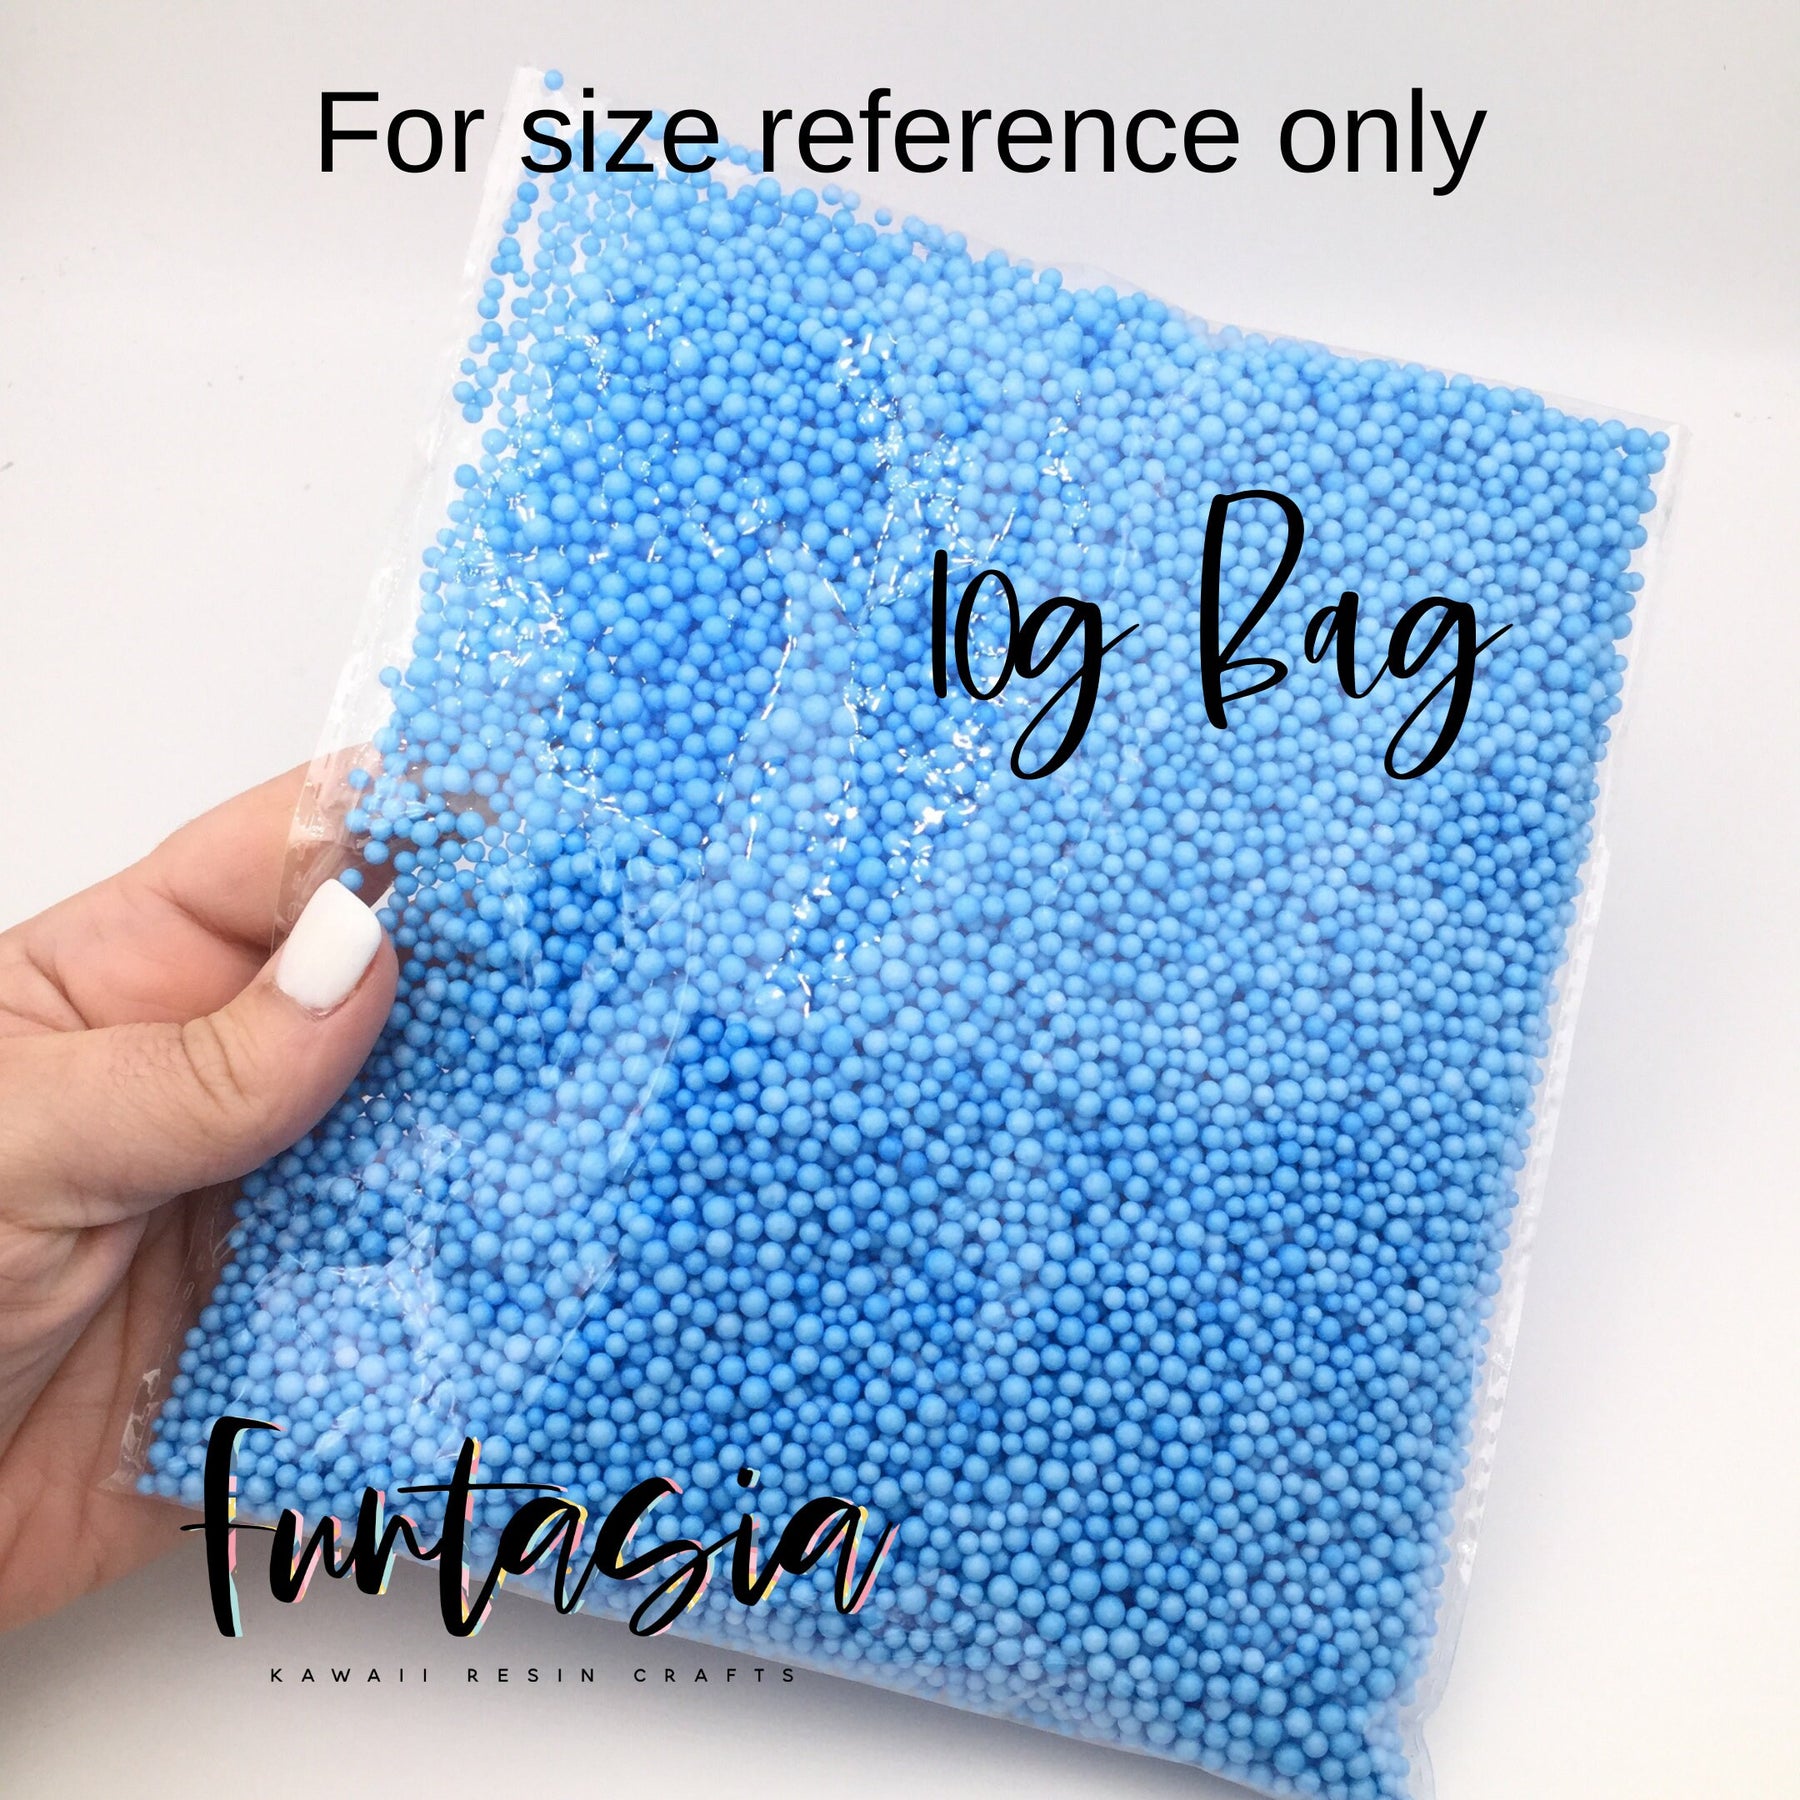 YELLOW Foam Beads for Slime - 10g Bag – Craftyrific